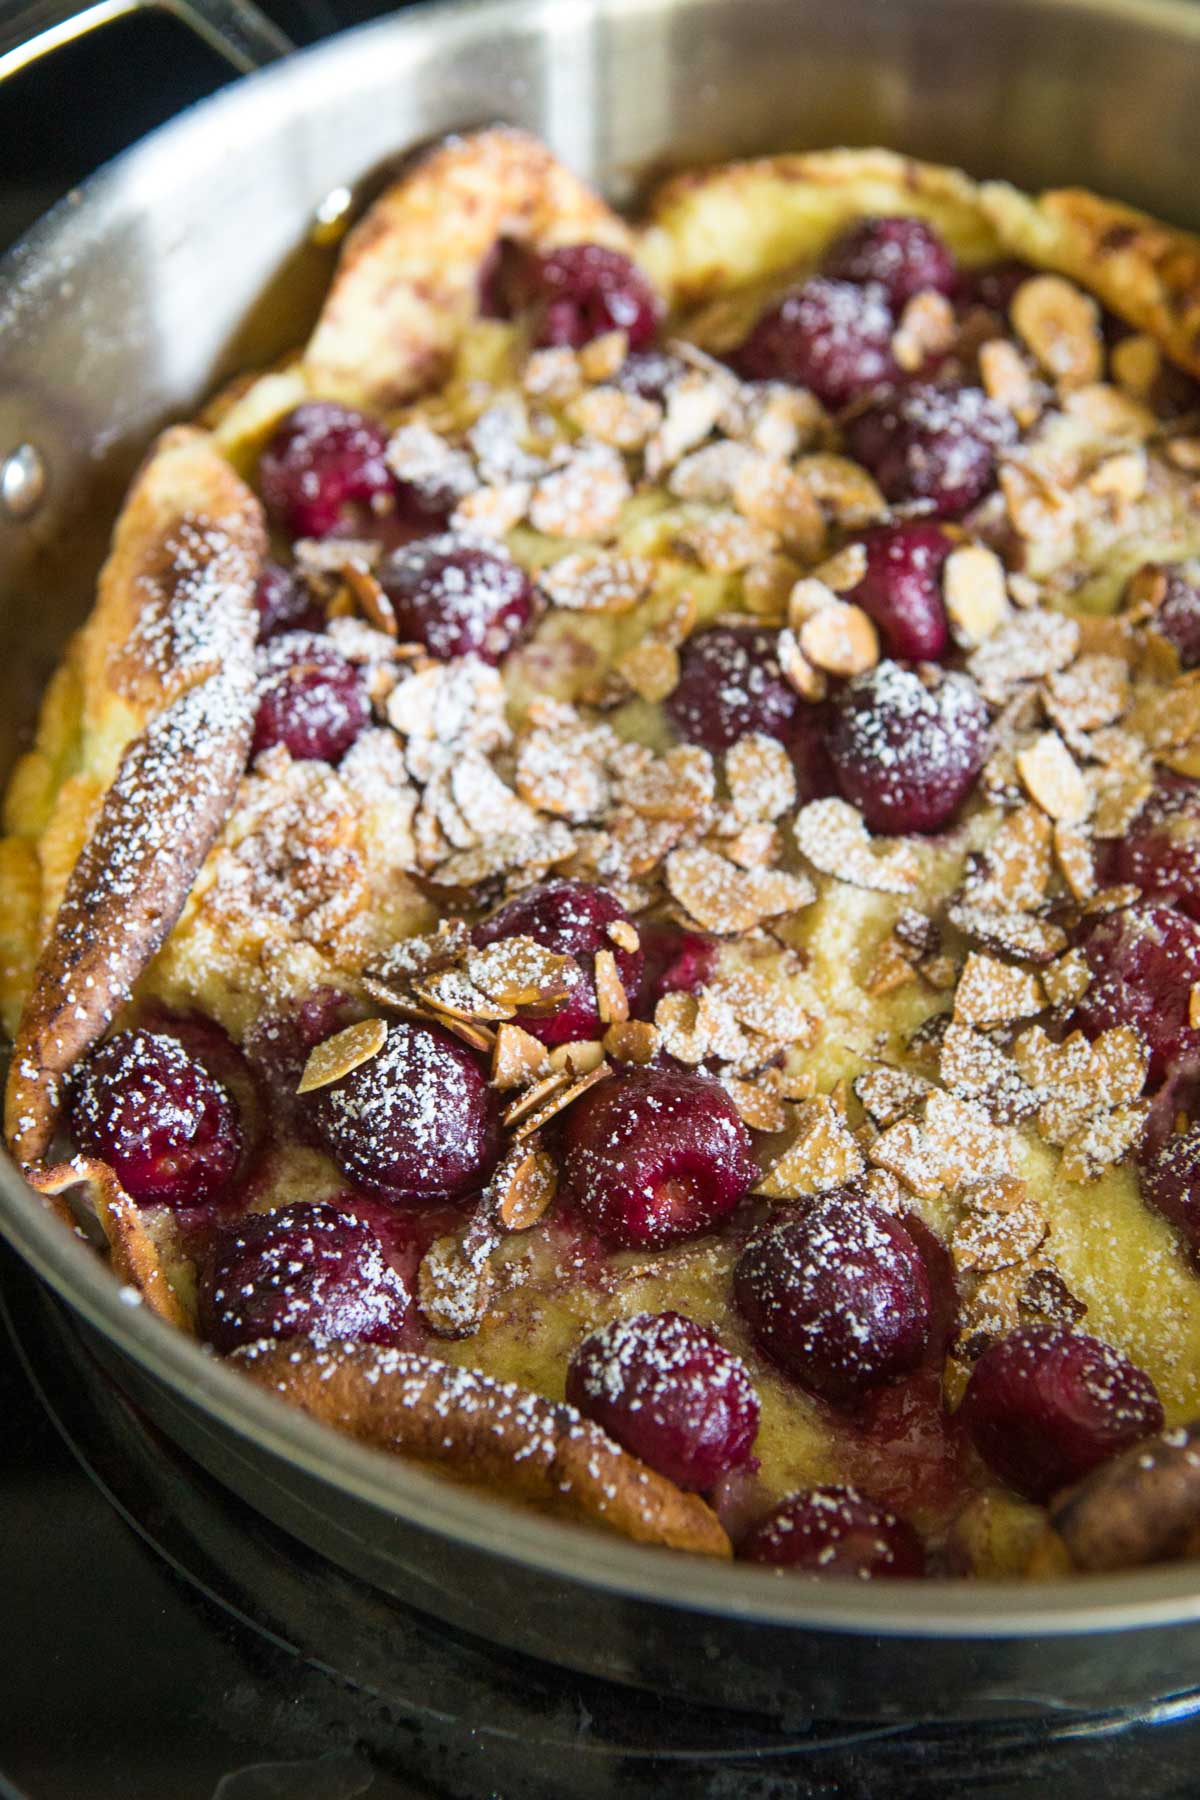 The baked cherry pancake with almonds and powdered sugar.